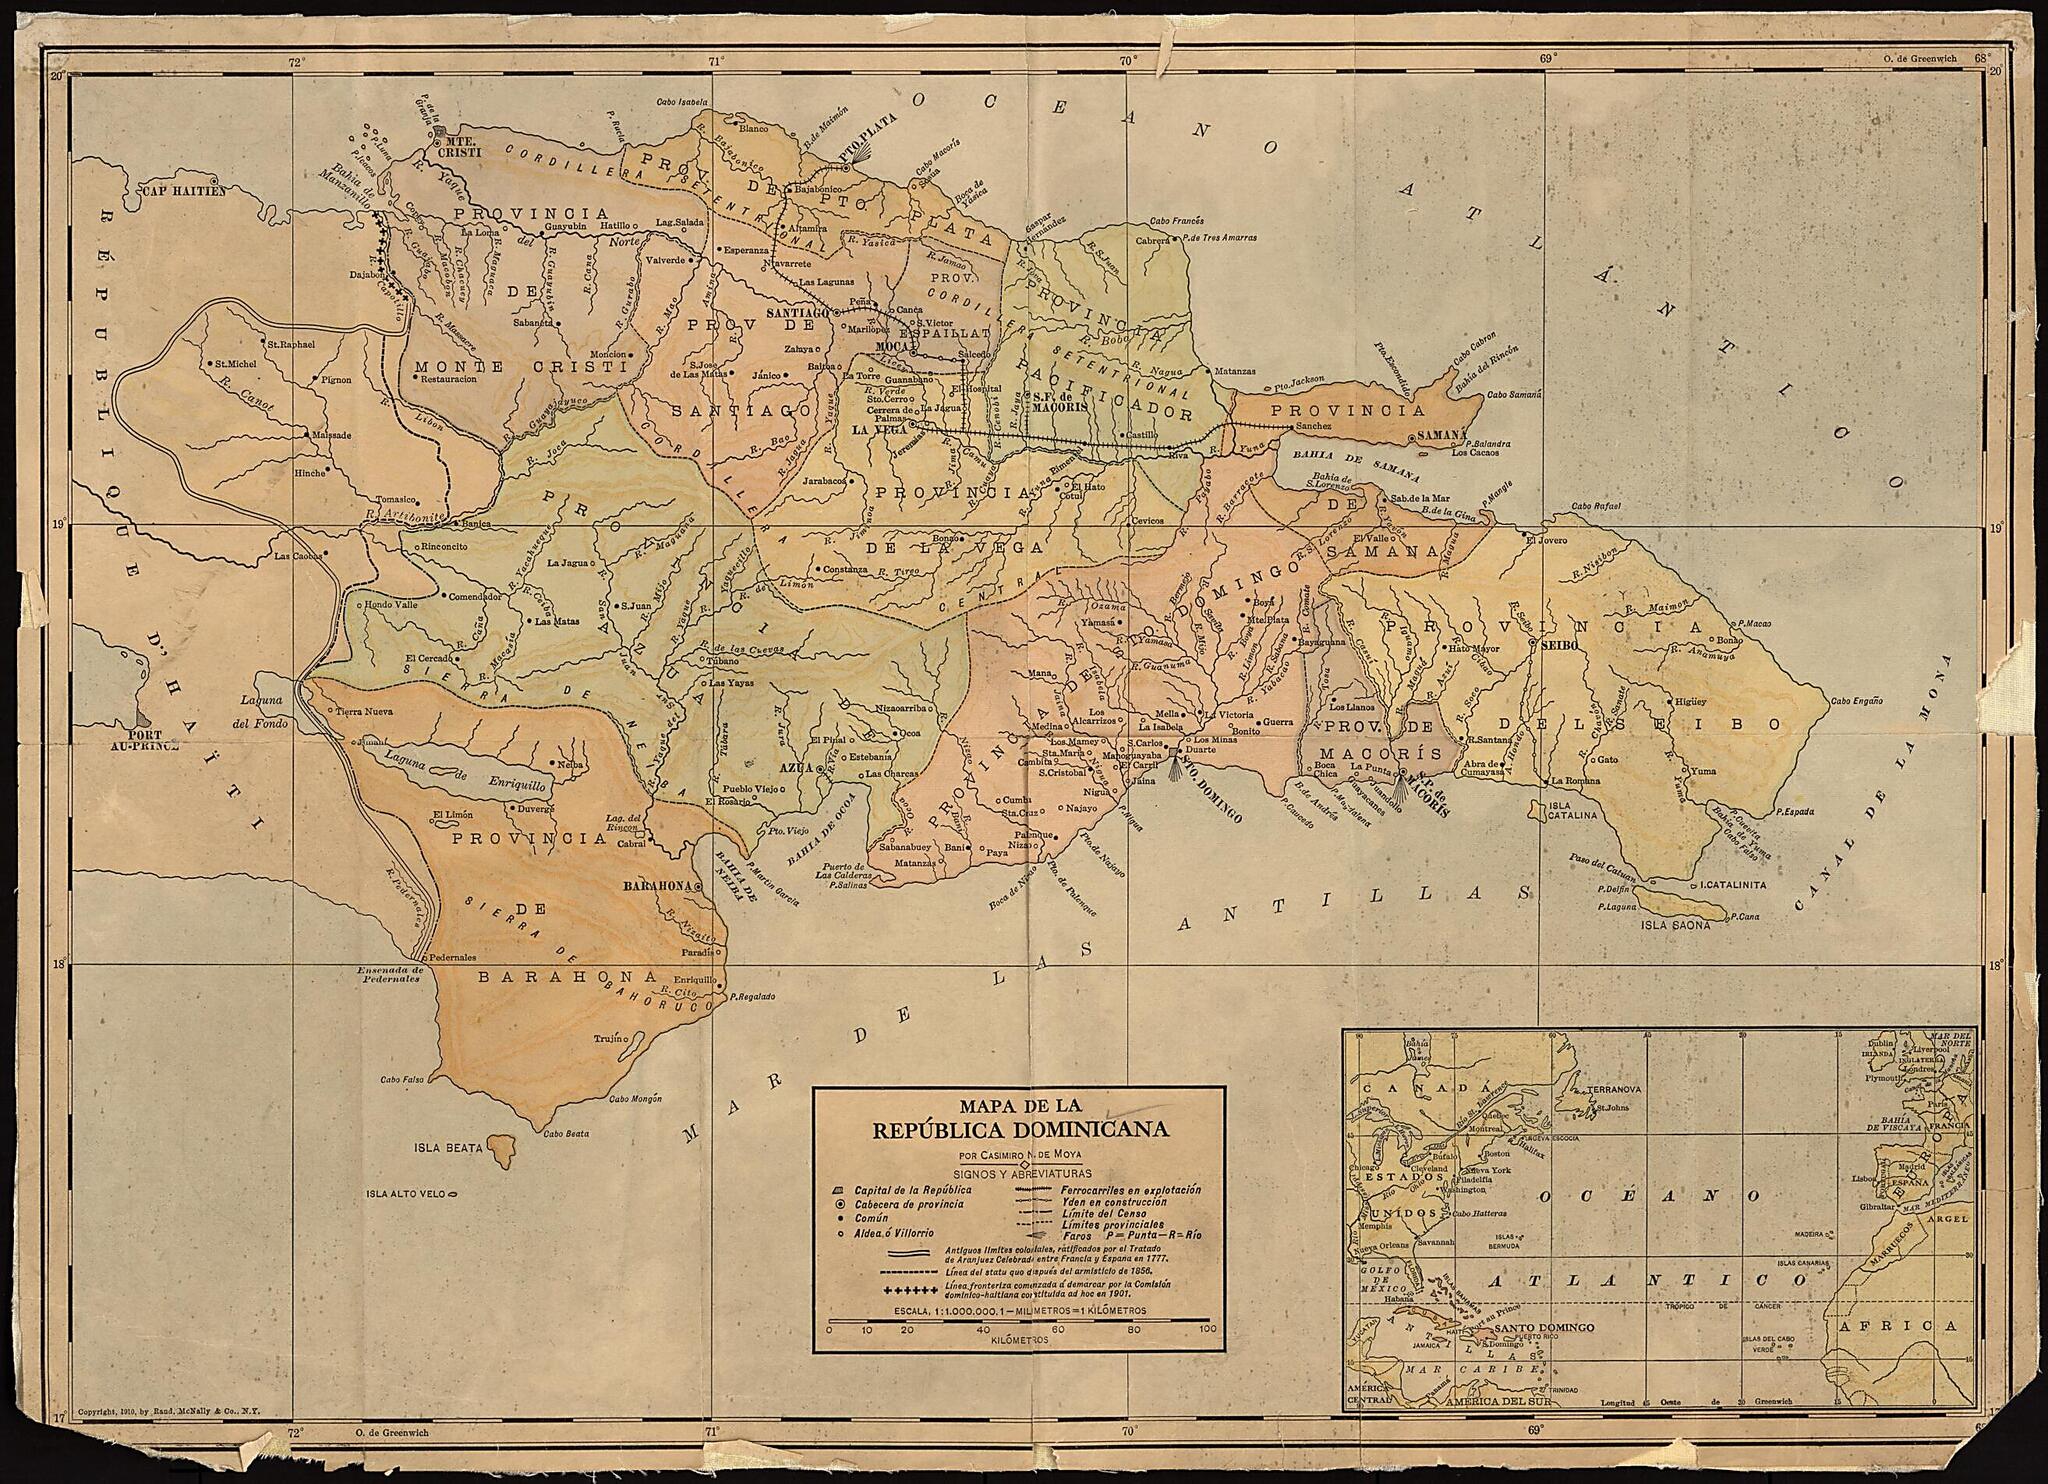 This old map of Map of the Dominican Republic. (Mapa De La República Dominicana) from 1910 was created by Casimiro N. De Moya in 1910